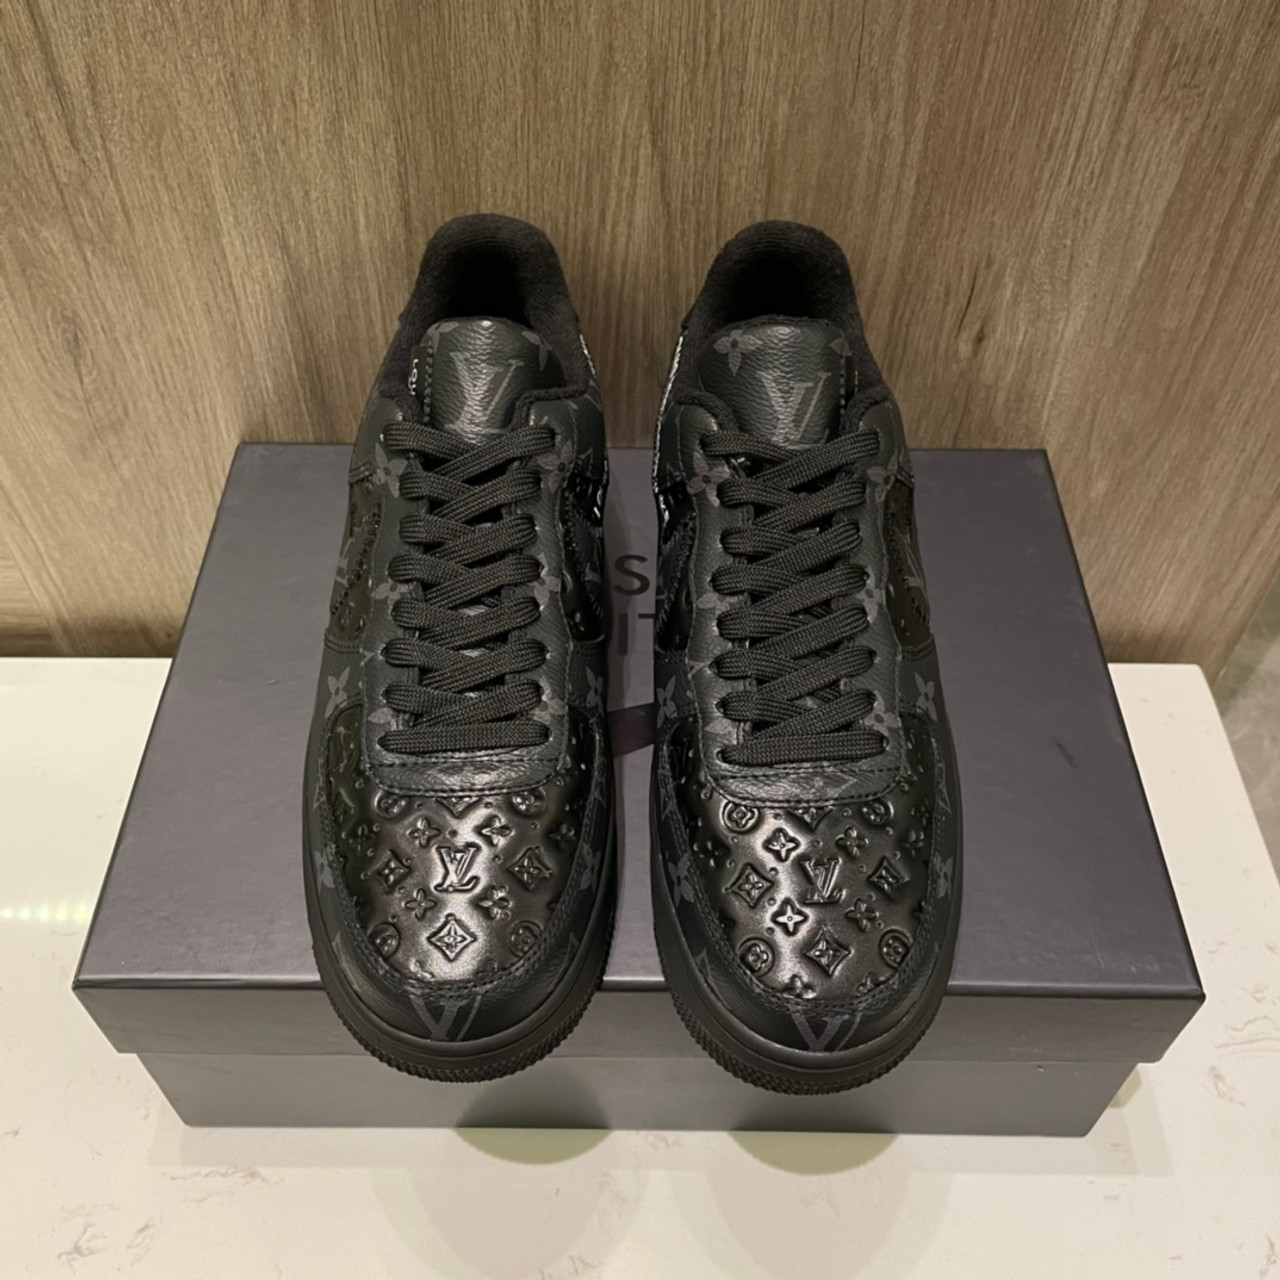 TBlake on X: Anyone want to guess the price of these replica Louis Vuitton  Nike/Jordan jawns at the local thrift?  / X